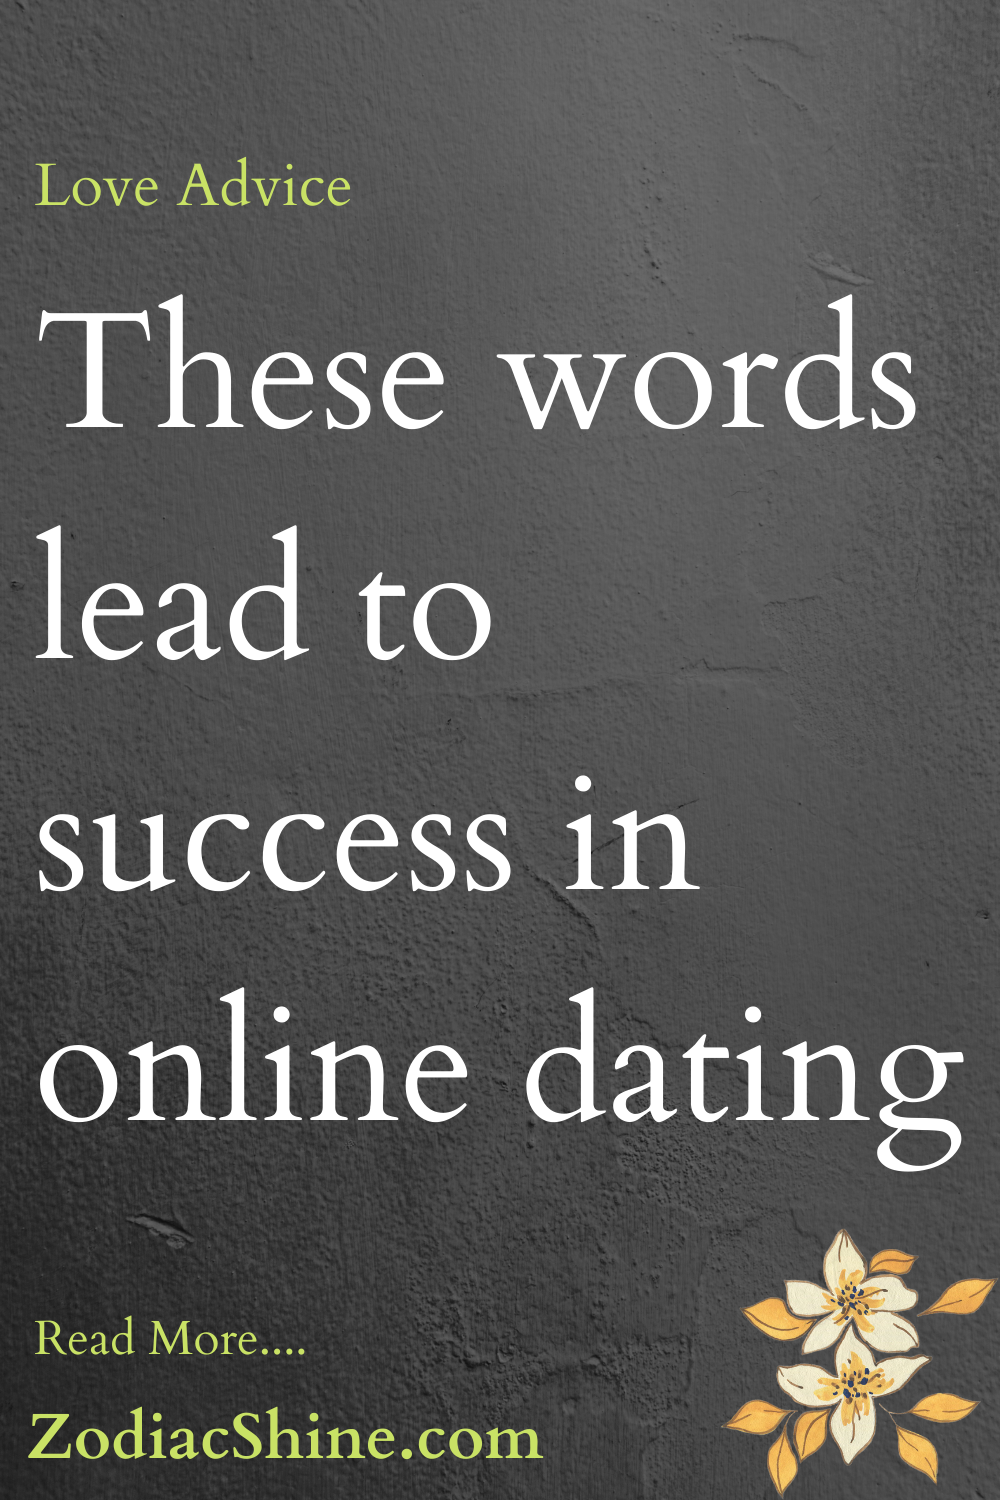 These words lead to success in online dating